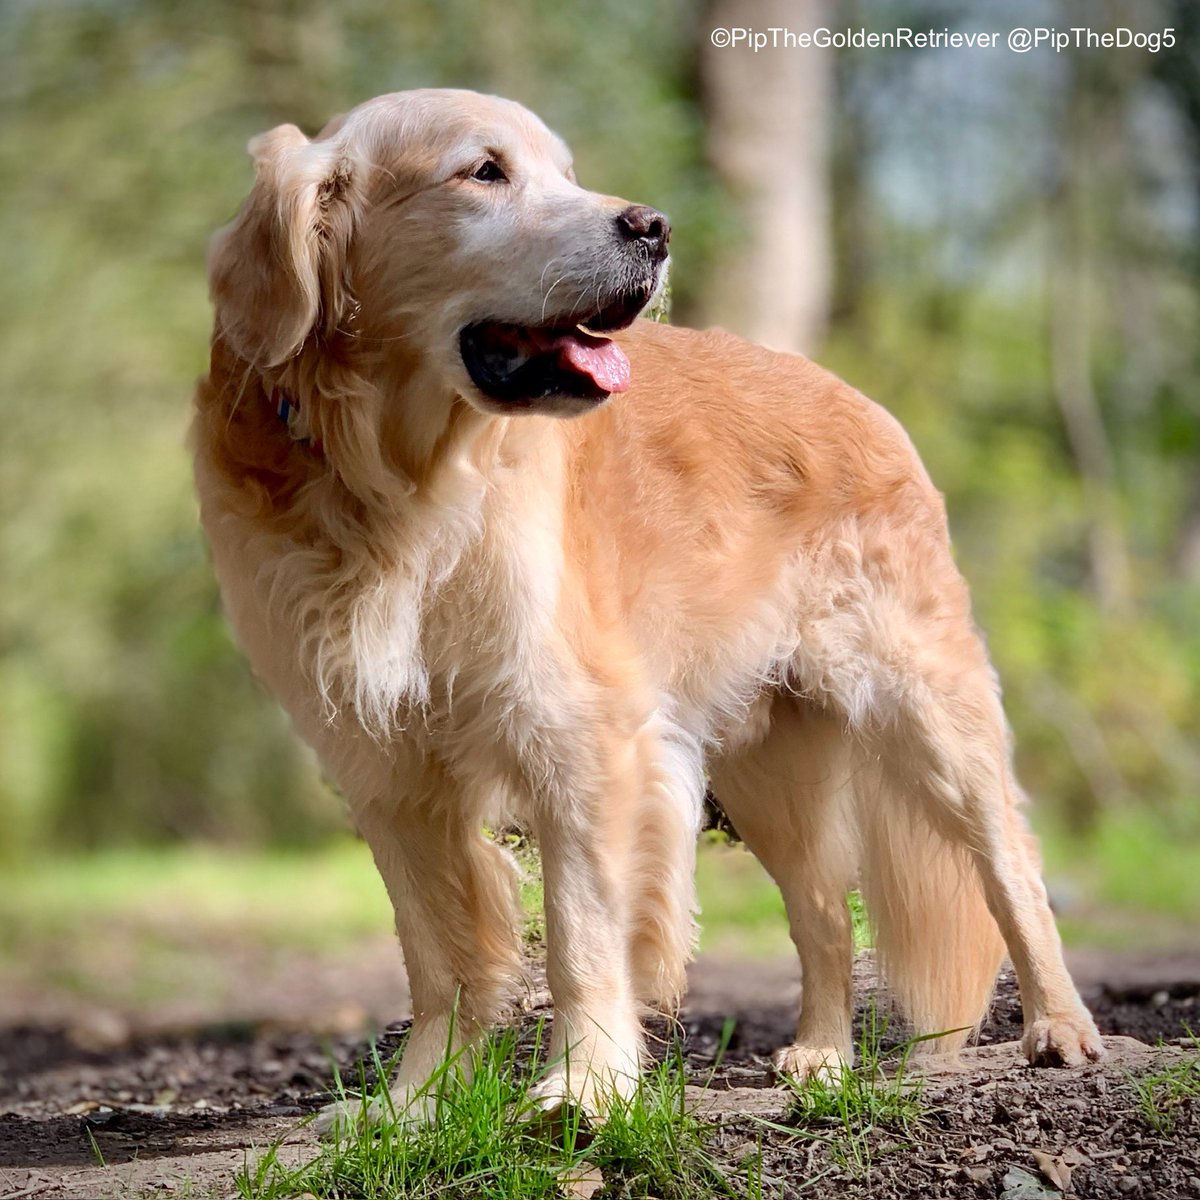 🌤️🐶🌳

Happy Monday! My family and I wish you everything you wish for yourself this week.

#GoldenRetrievers 🐕😀🐾